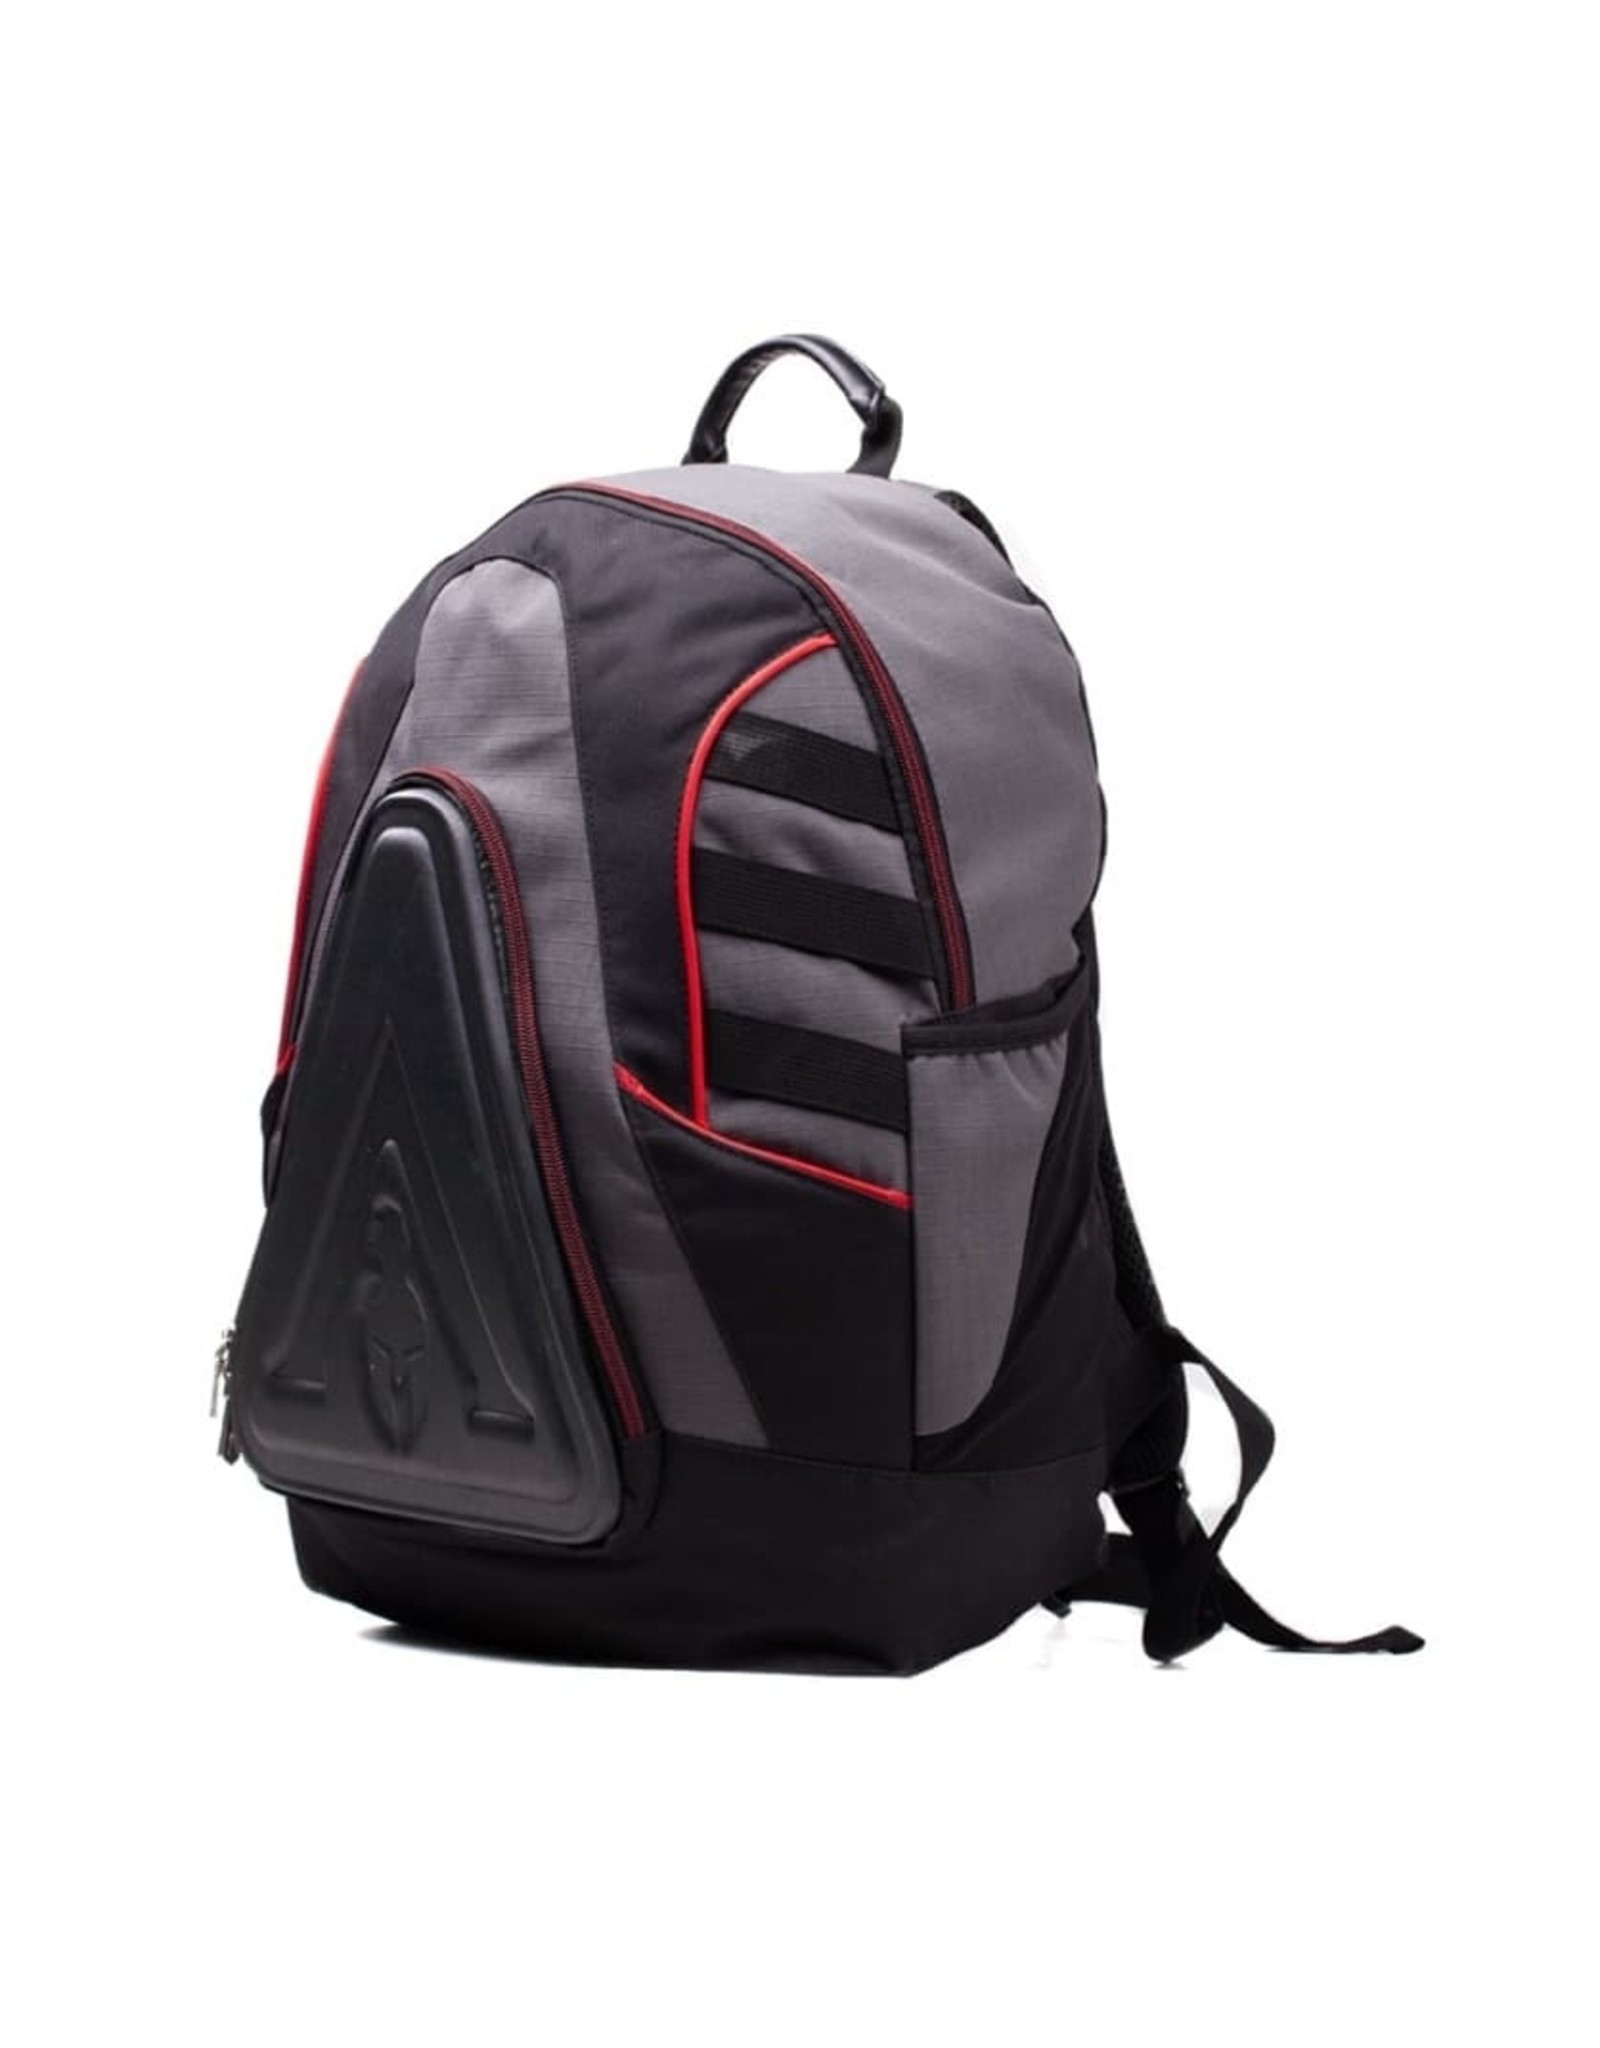 Assassins Creed Merchandise backpacks - Assassin's Creed tech backpack